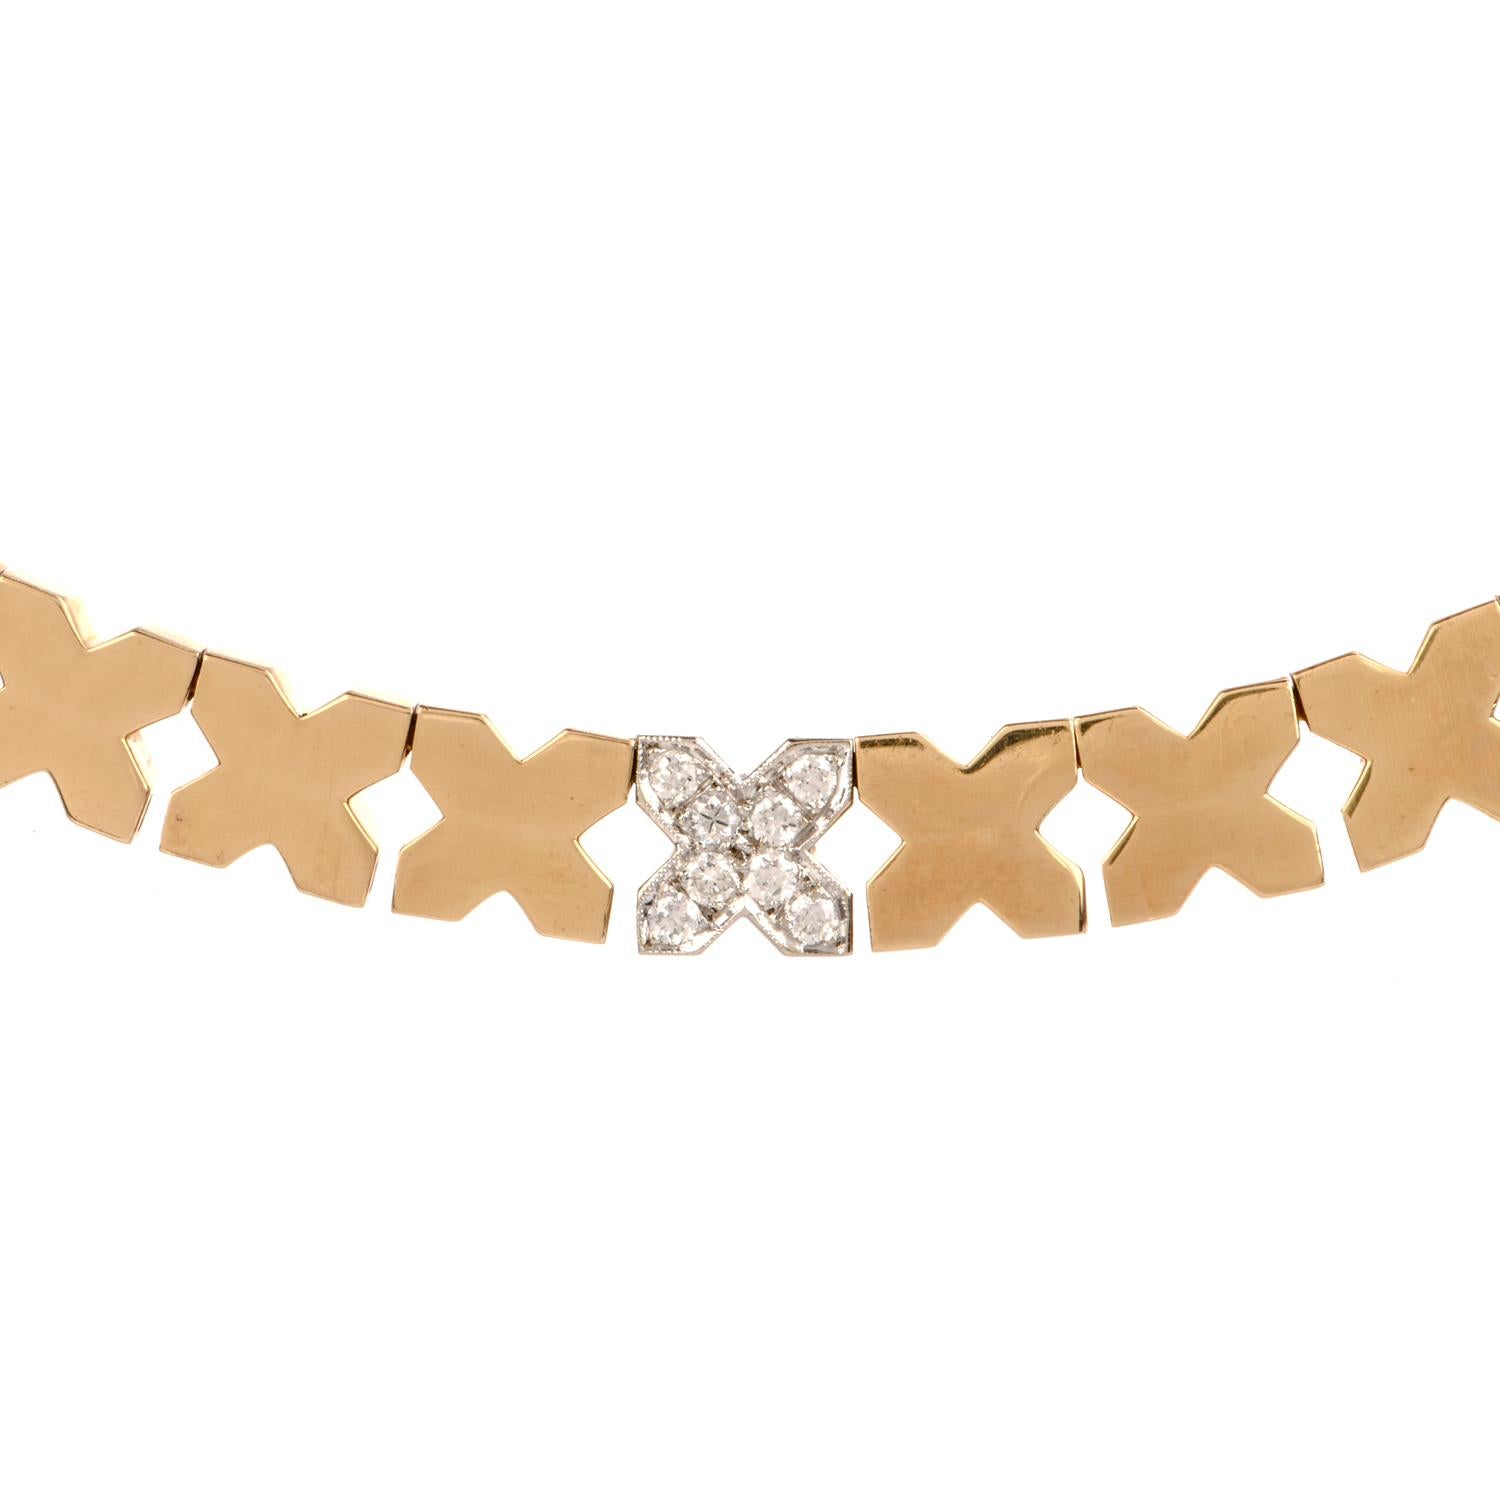 This stylish designer 1970's Hammerman Brothers diamond choker necklace is crafted in solid 14-karat yellow gold. Composed of 43 'X' shaped gold motifs, mesuring 9mm wide. Centered by one 'X' swathed in pave-set round-cut diamonds, weighing